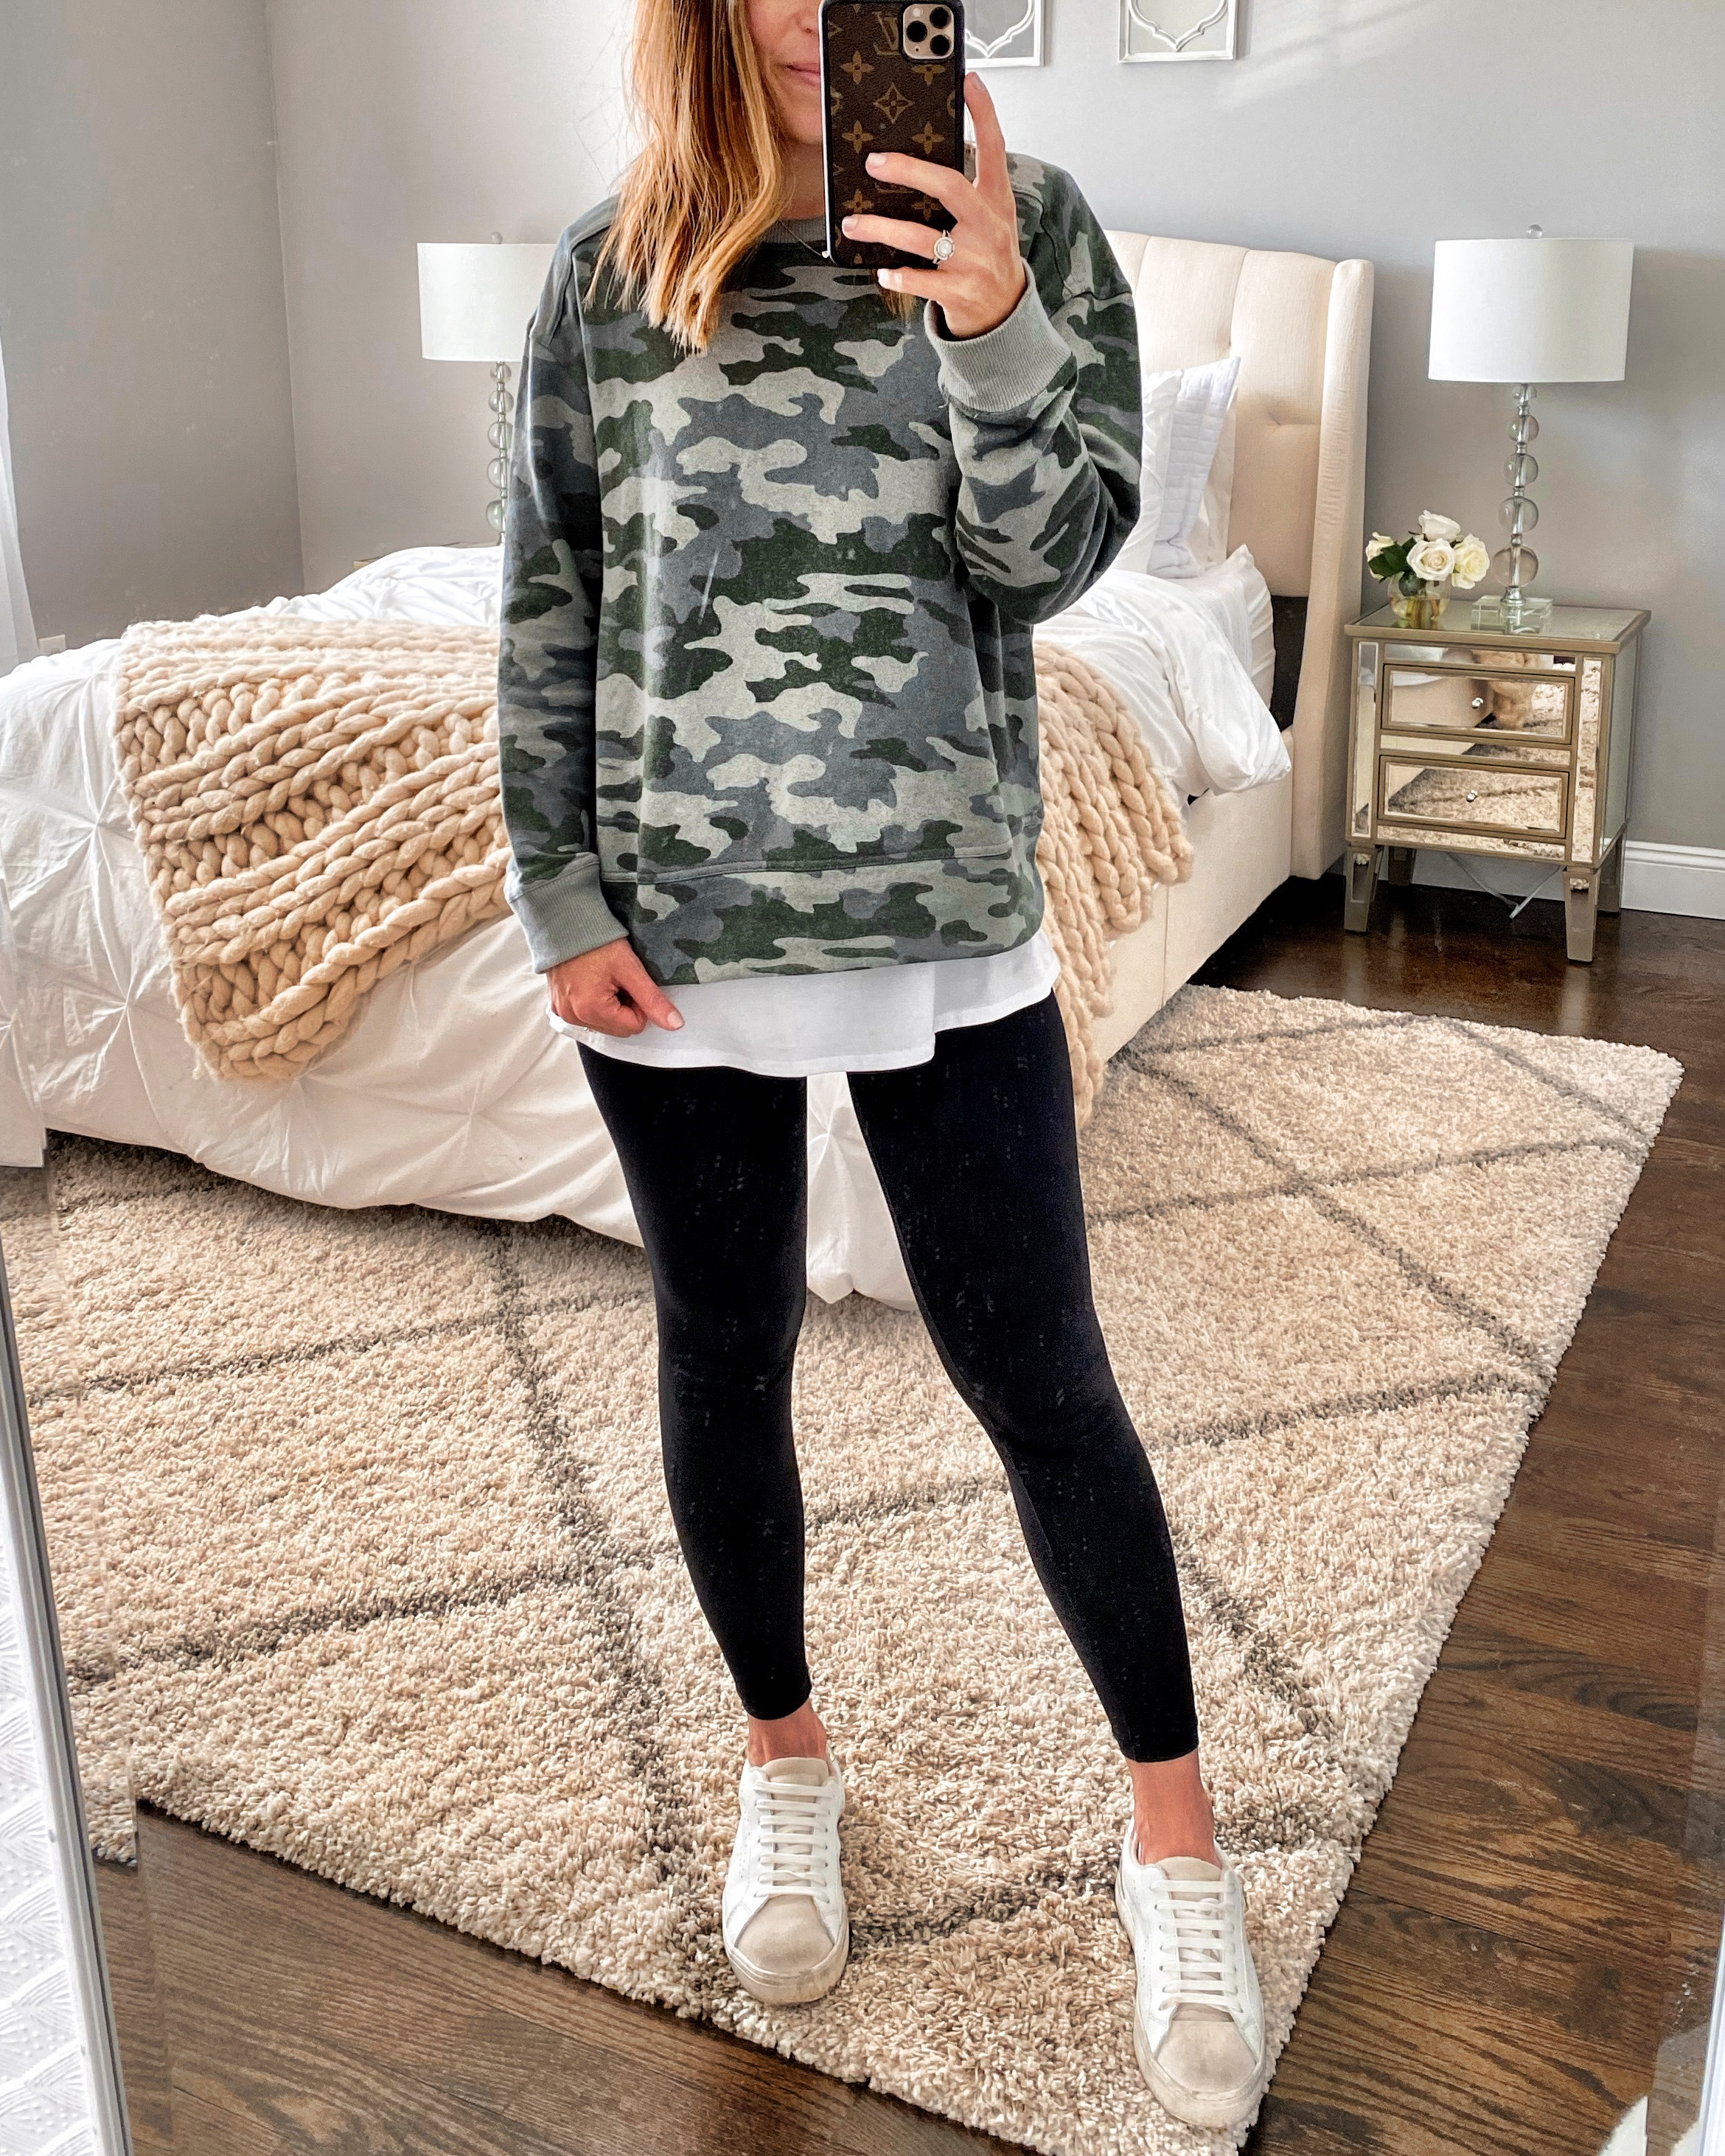 6 Leggings Outfits to Wear All Fall Long